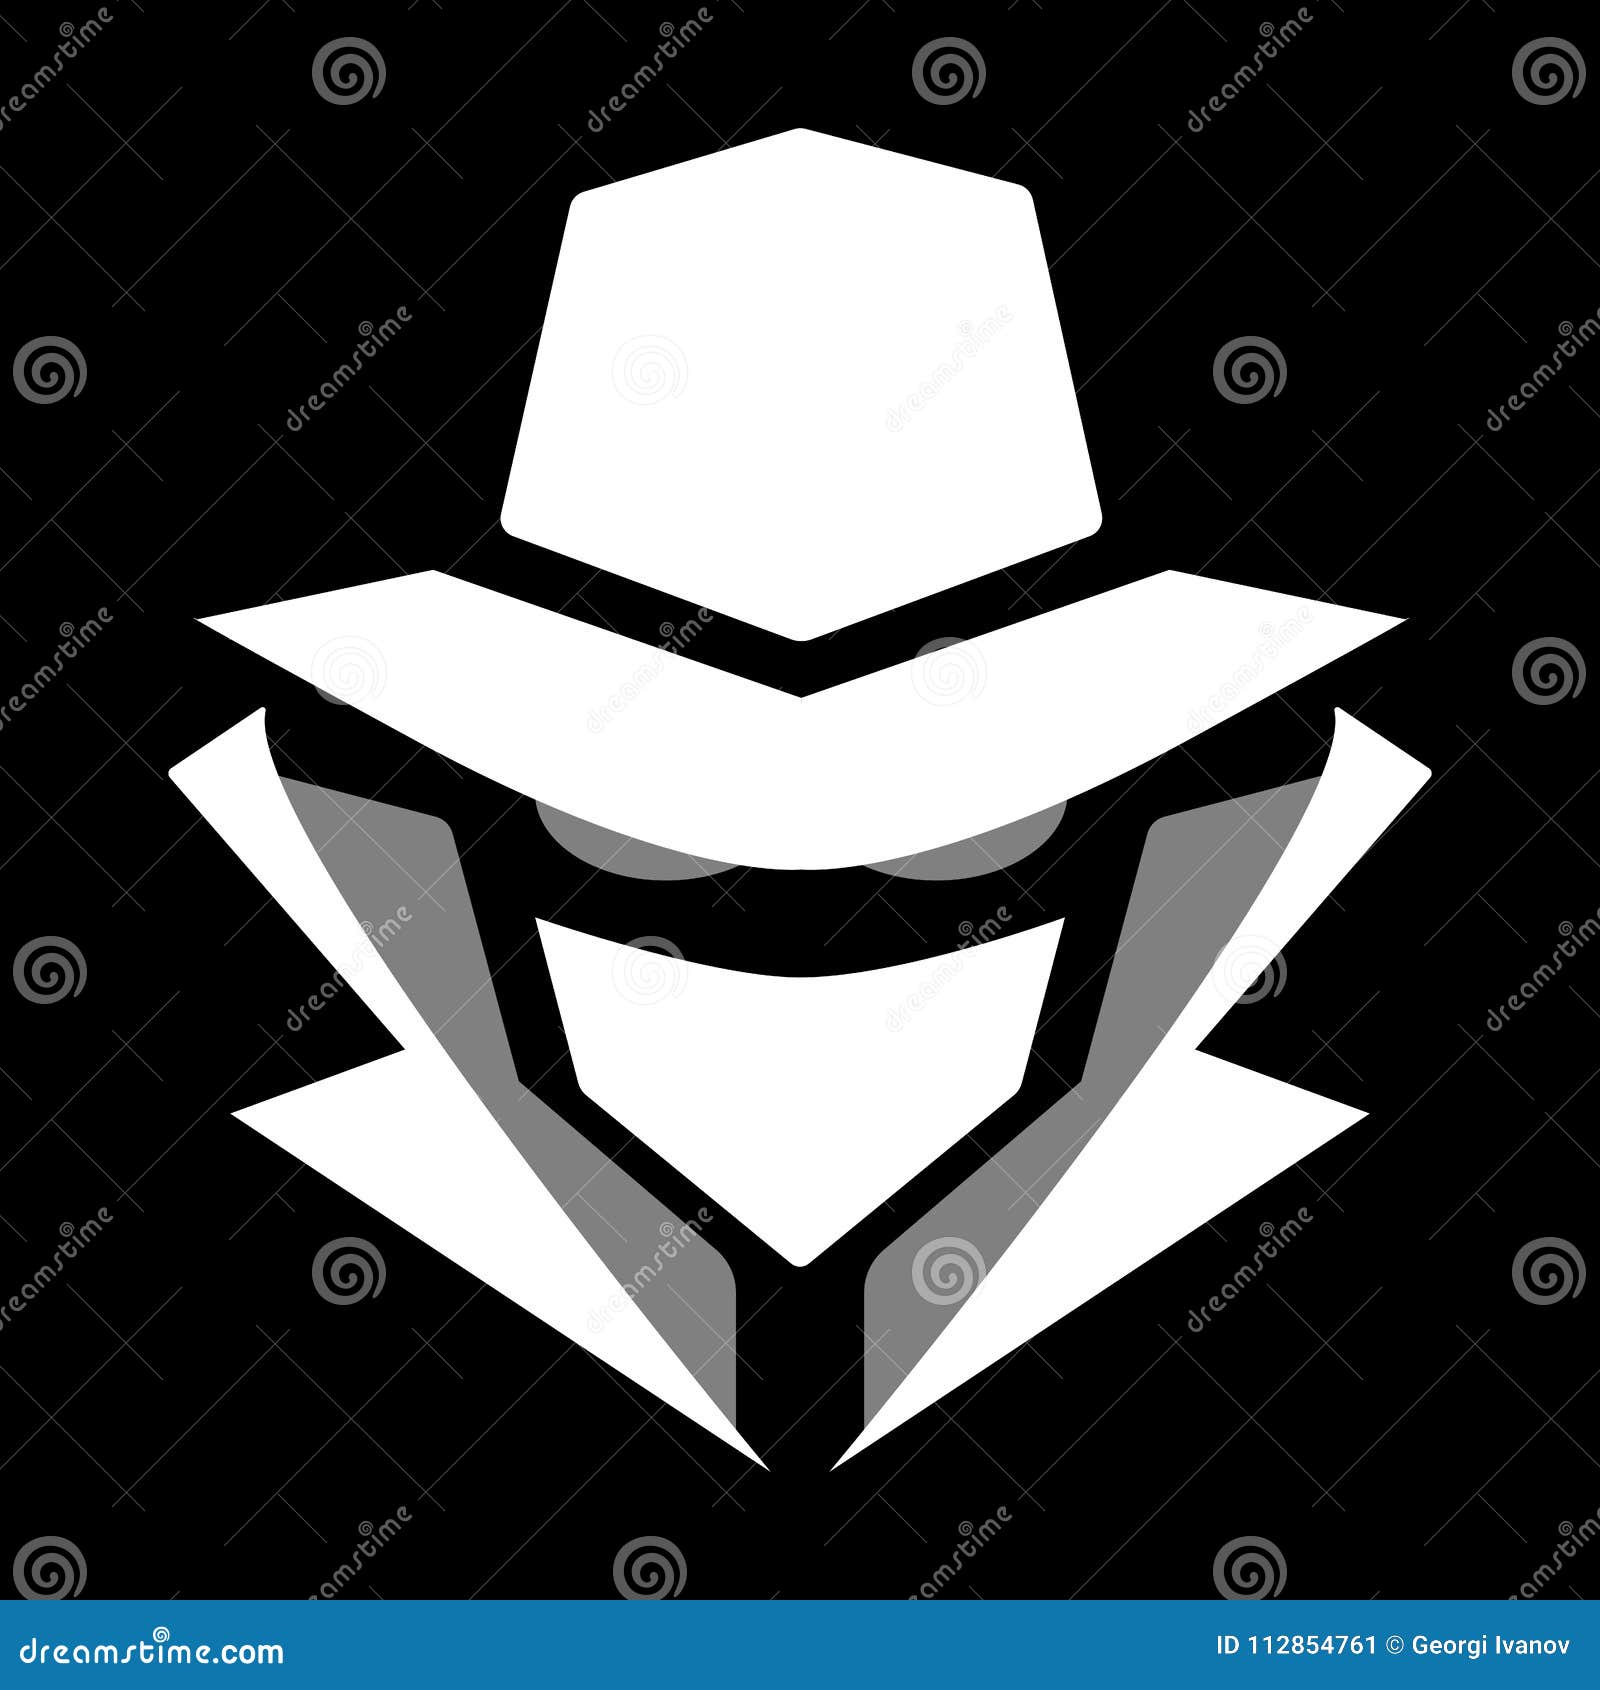 mysterious-computer-hacker-icon-white-grey-isolated-black-mysterious-computer-hacker-icon-white-grey-isolated-112854761.jpg